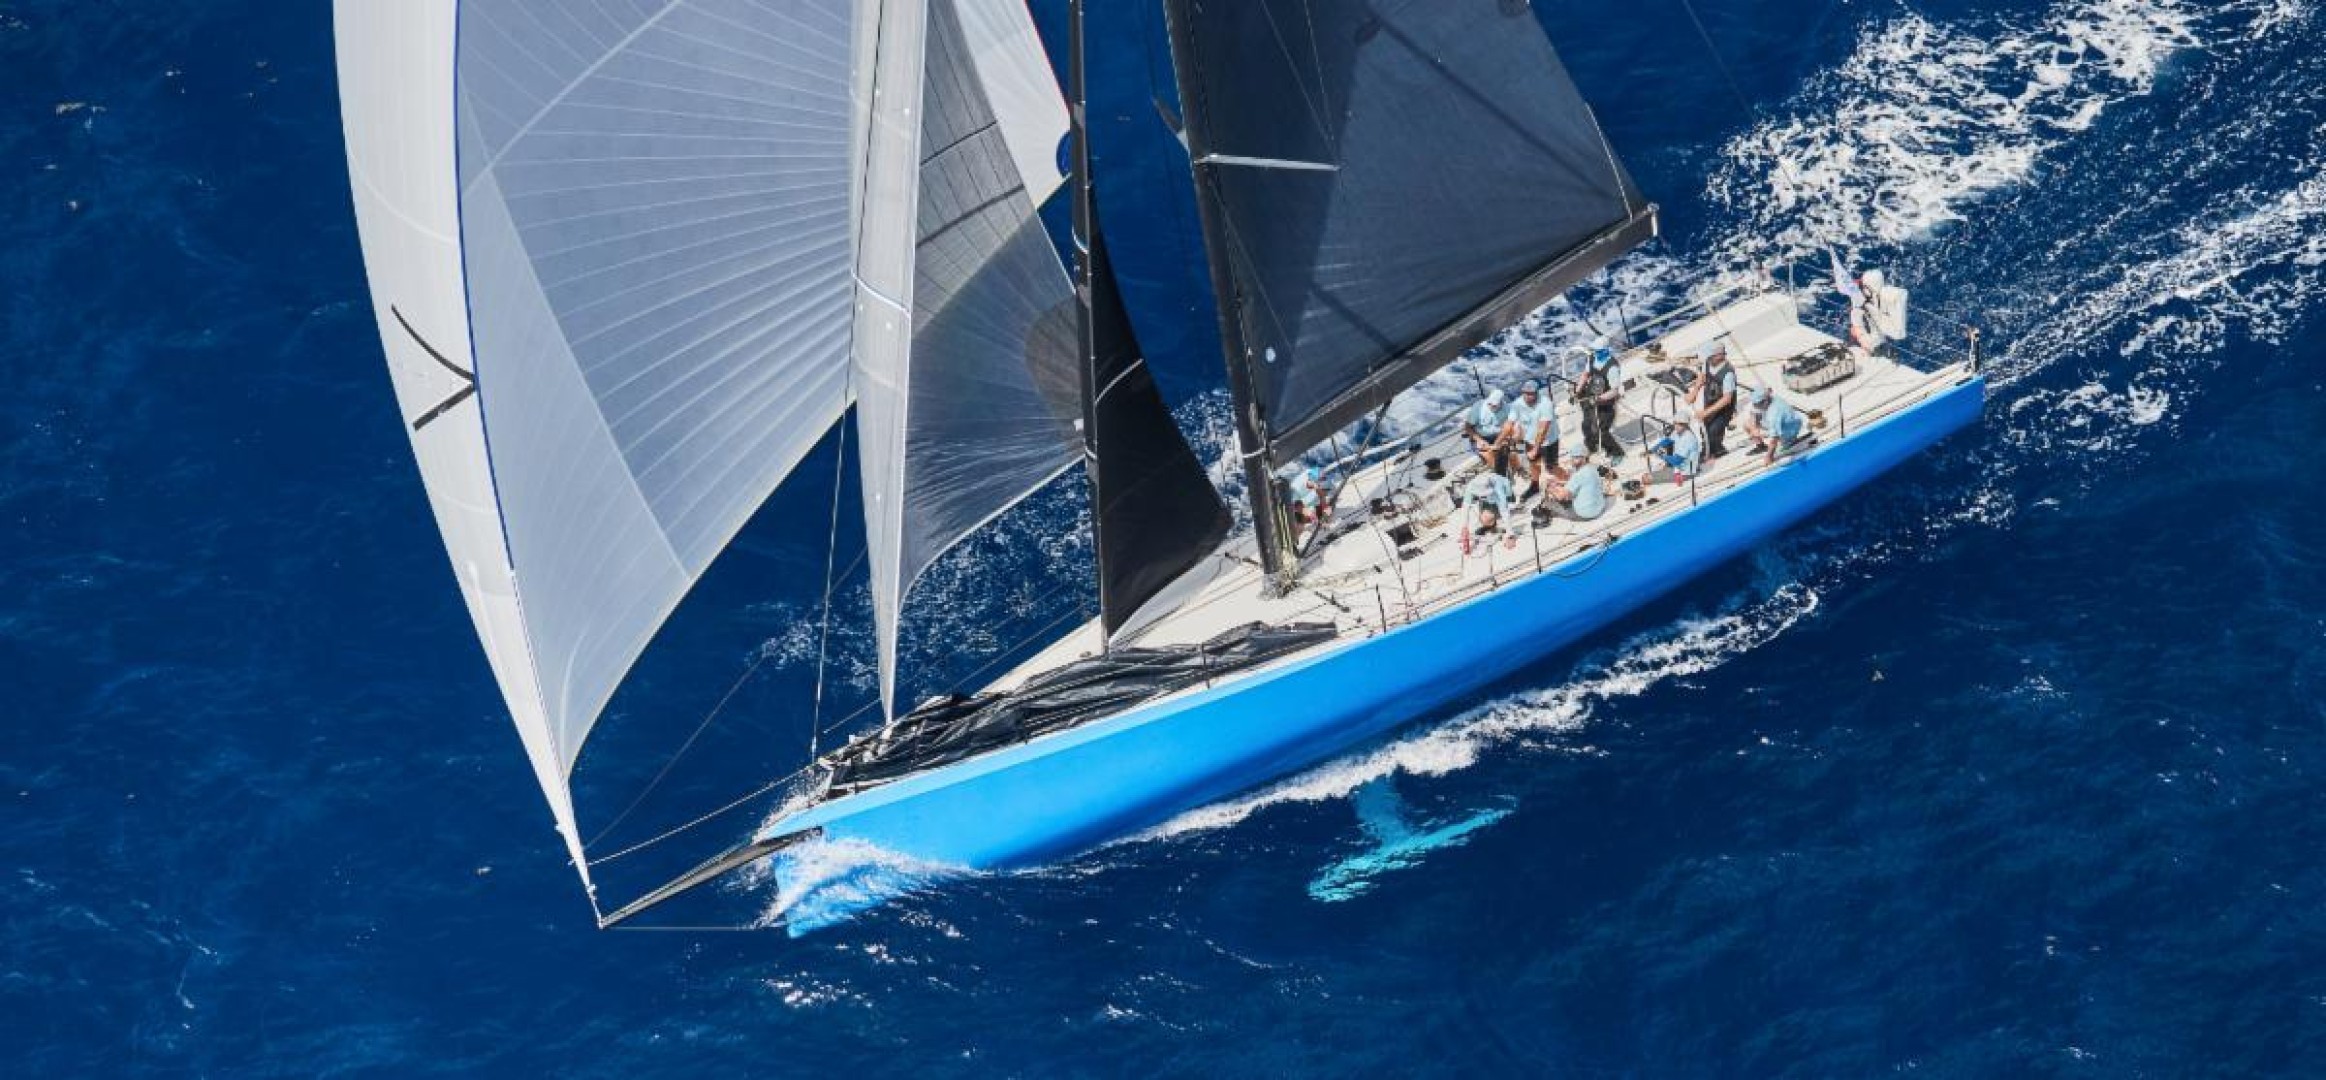 The overall winner of the 13th edition of the RORC Caribbean 600 is Christopher Sheehan's Pac52 Warrior One (USA)